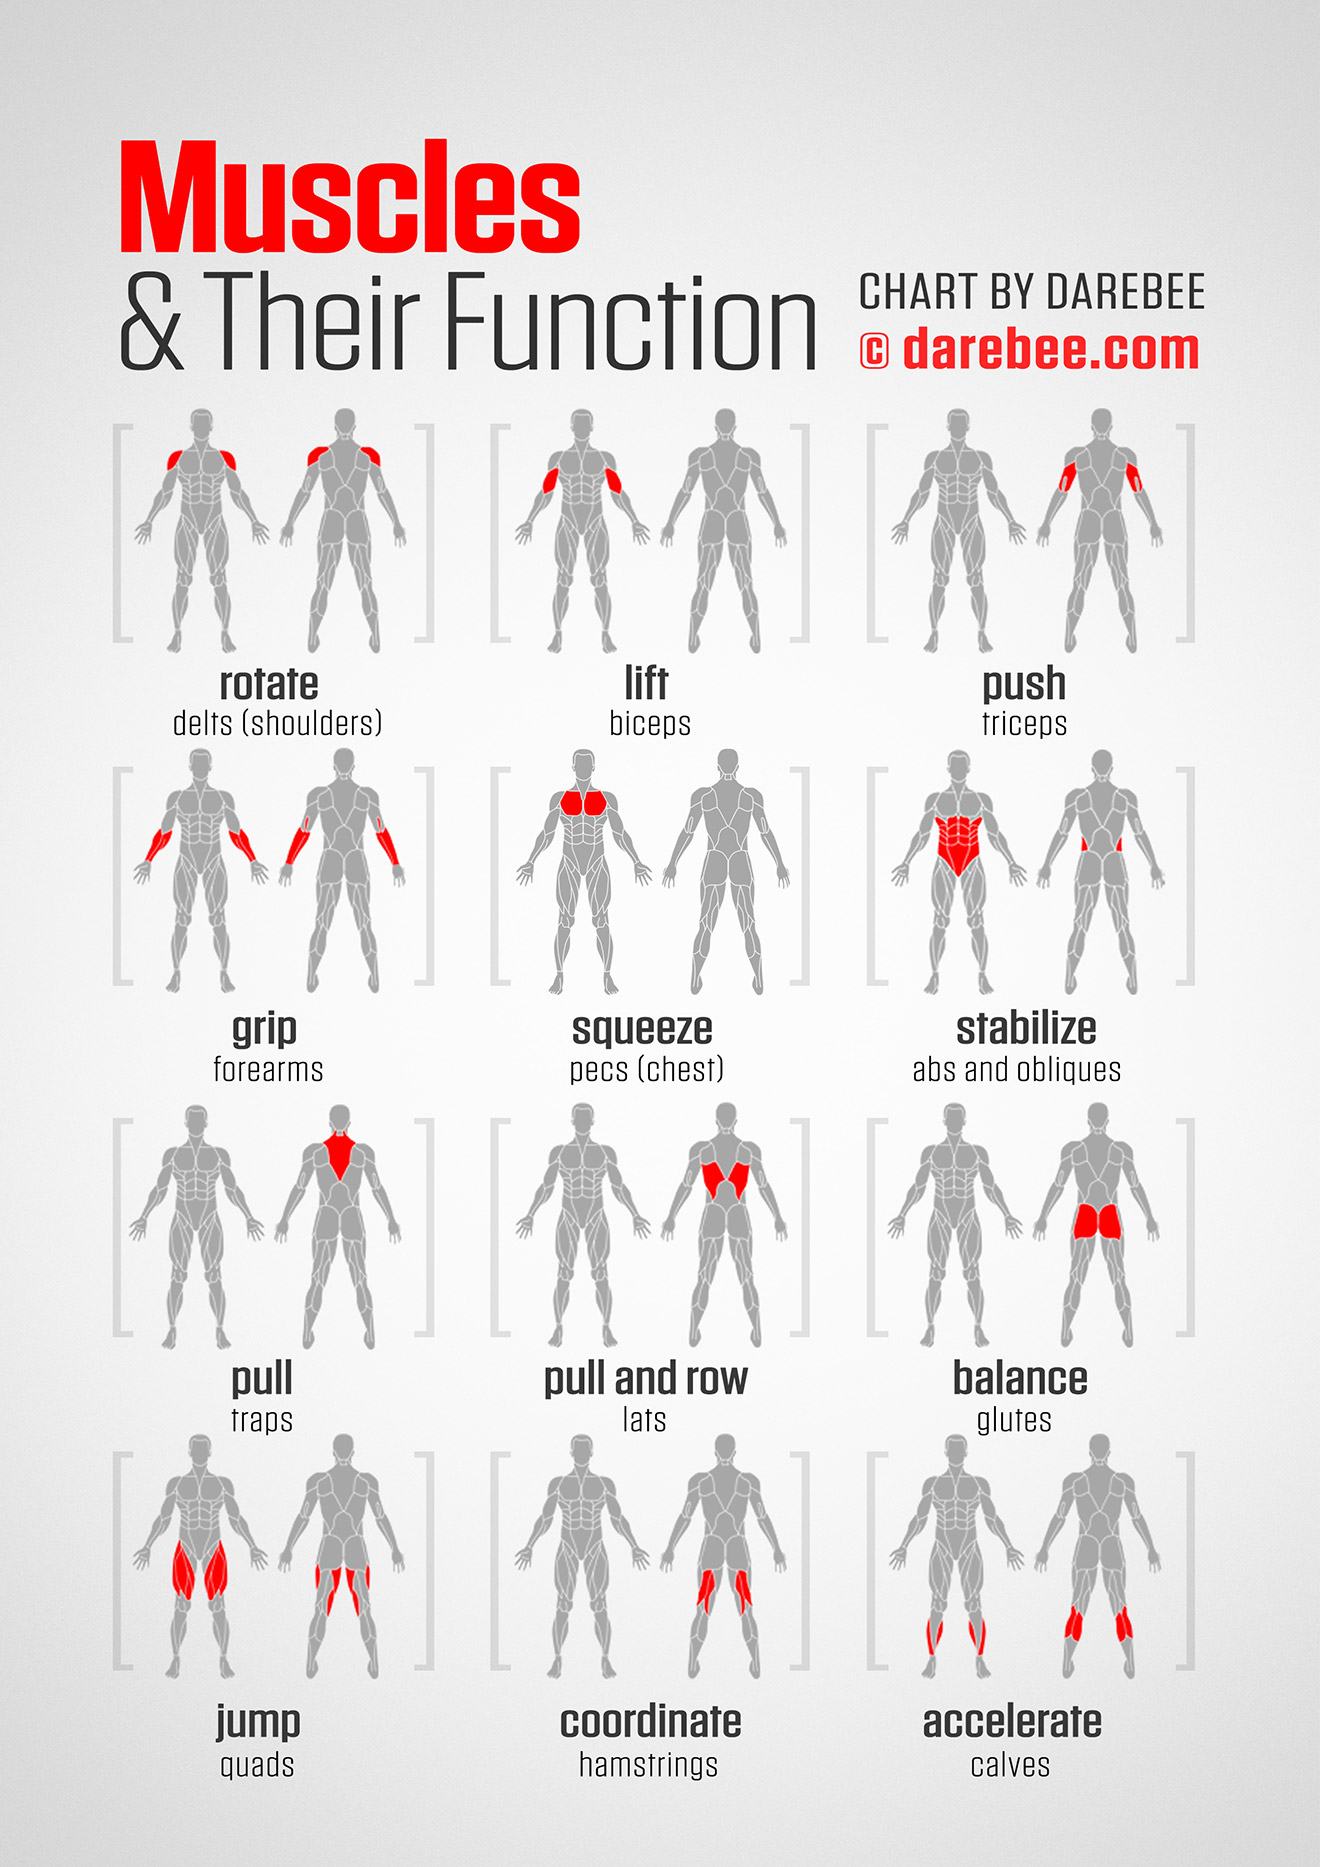 https://darebee.com/images/guides/muscle-function.jpg